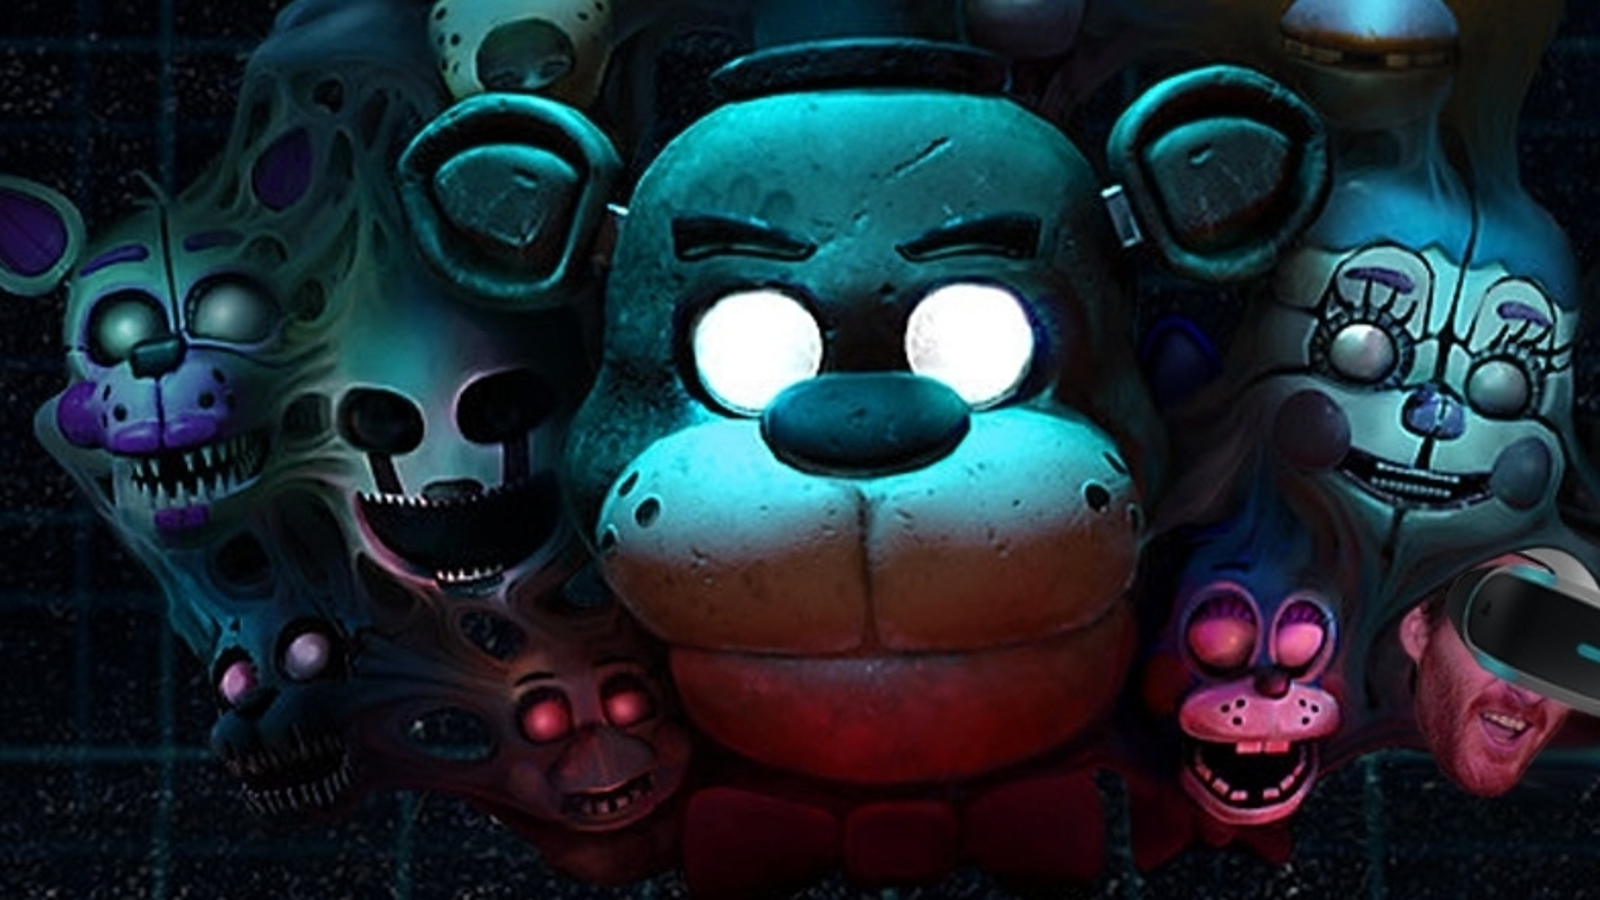 Blumhouse's 'Five Nights at Freddy's 2' Movie In Development, Says